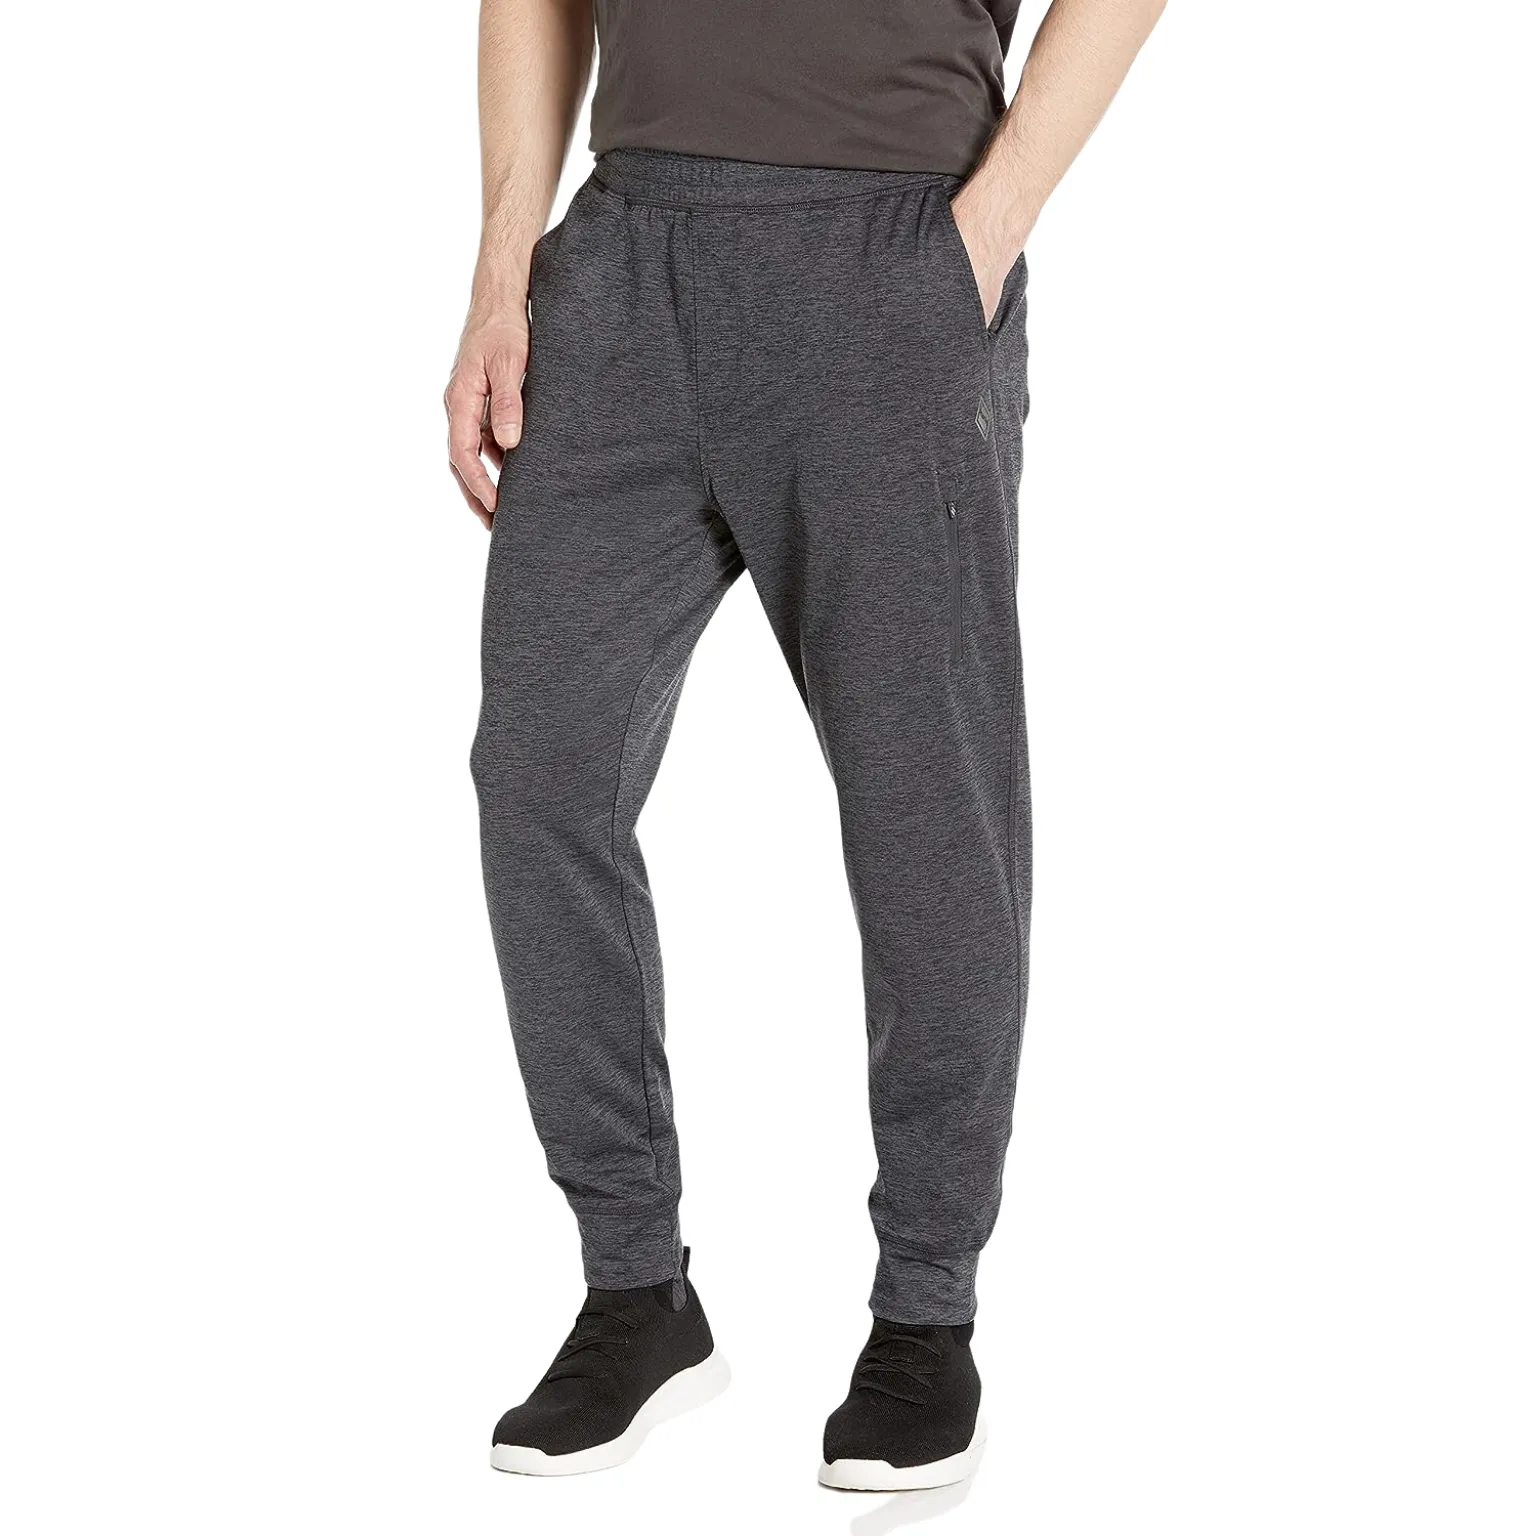 Jogging Pants manufacturing with trendy design